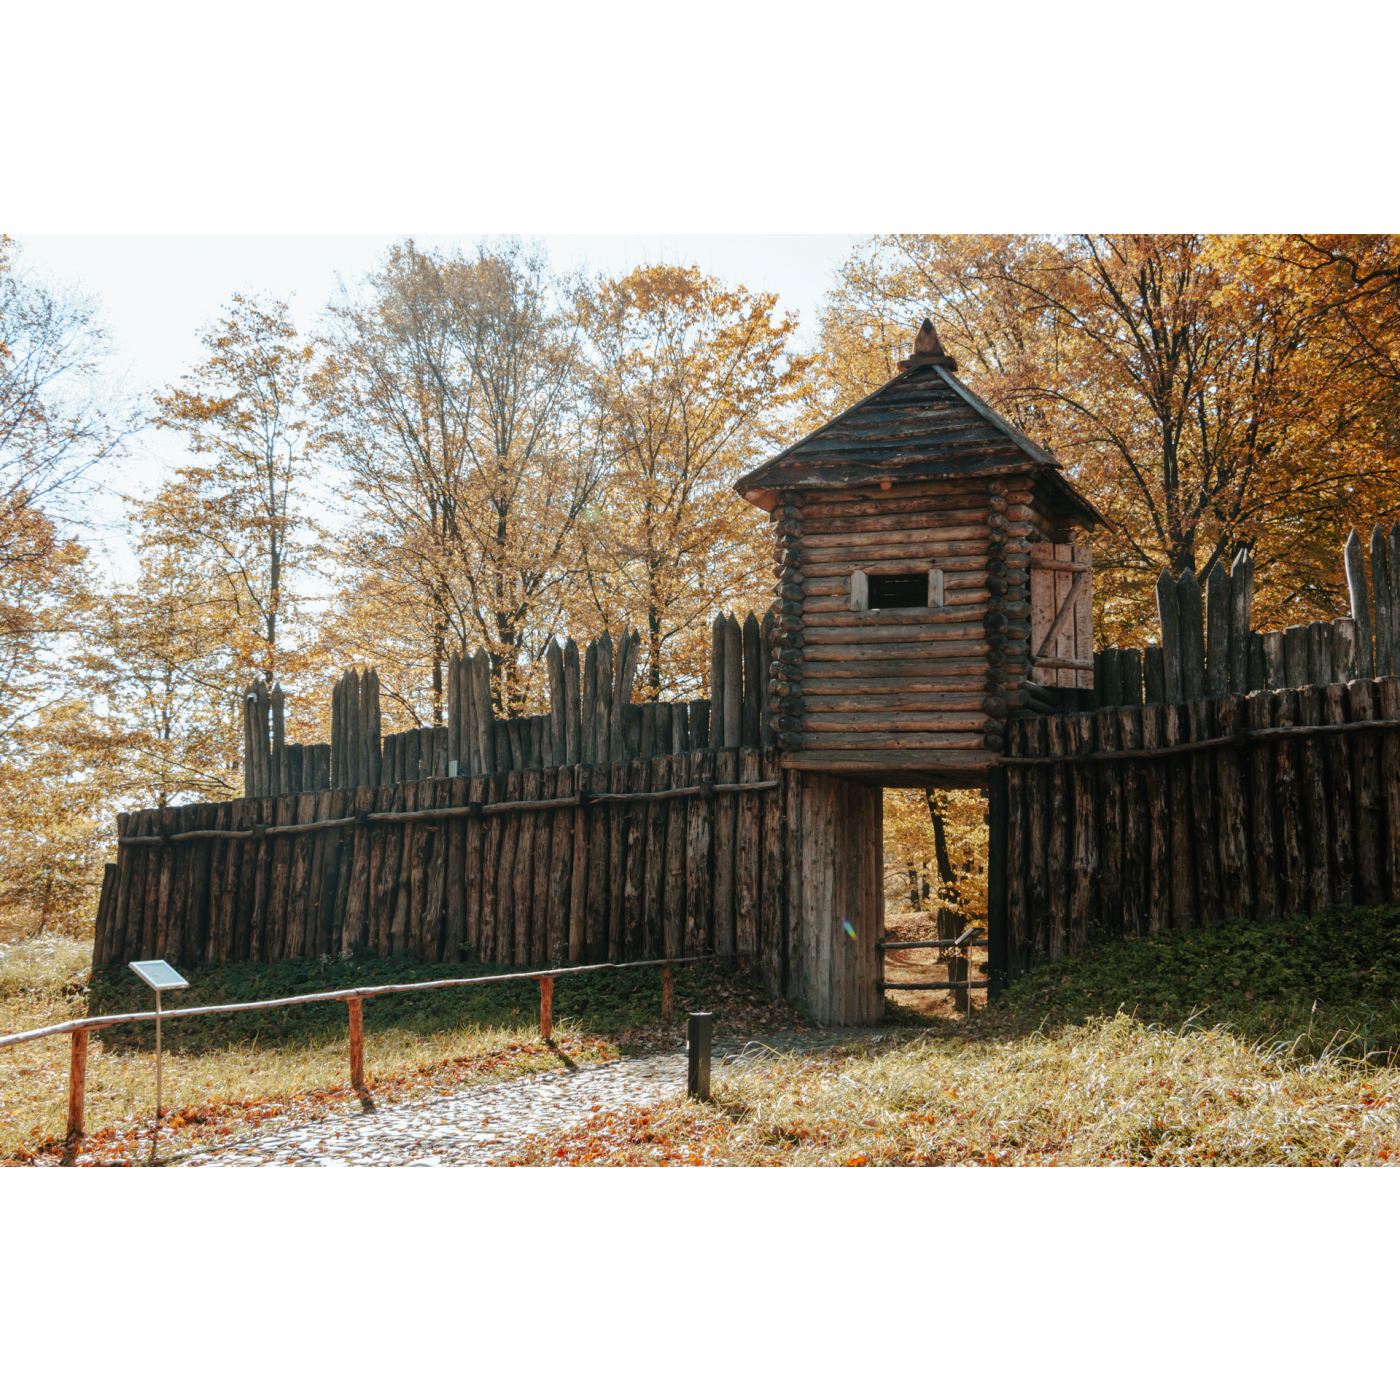 Entrance to a wooden castle with a fence made of wood piles against the background of autumn trees